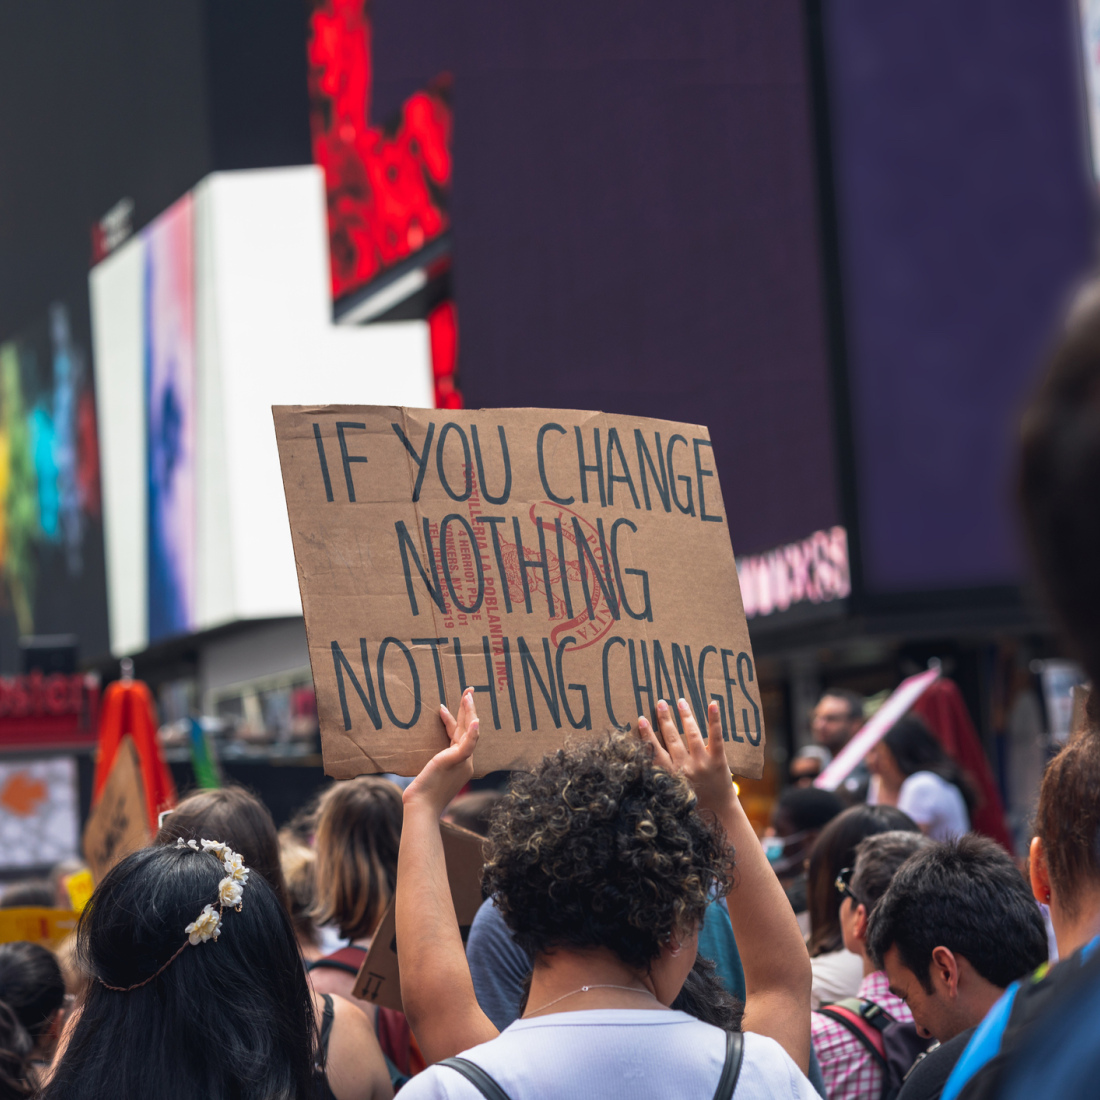 Someone holds up a poster that reads "if you change nothing, nothing will change" during a protest in a city.